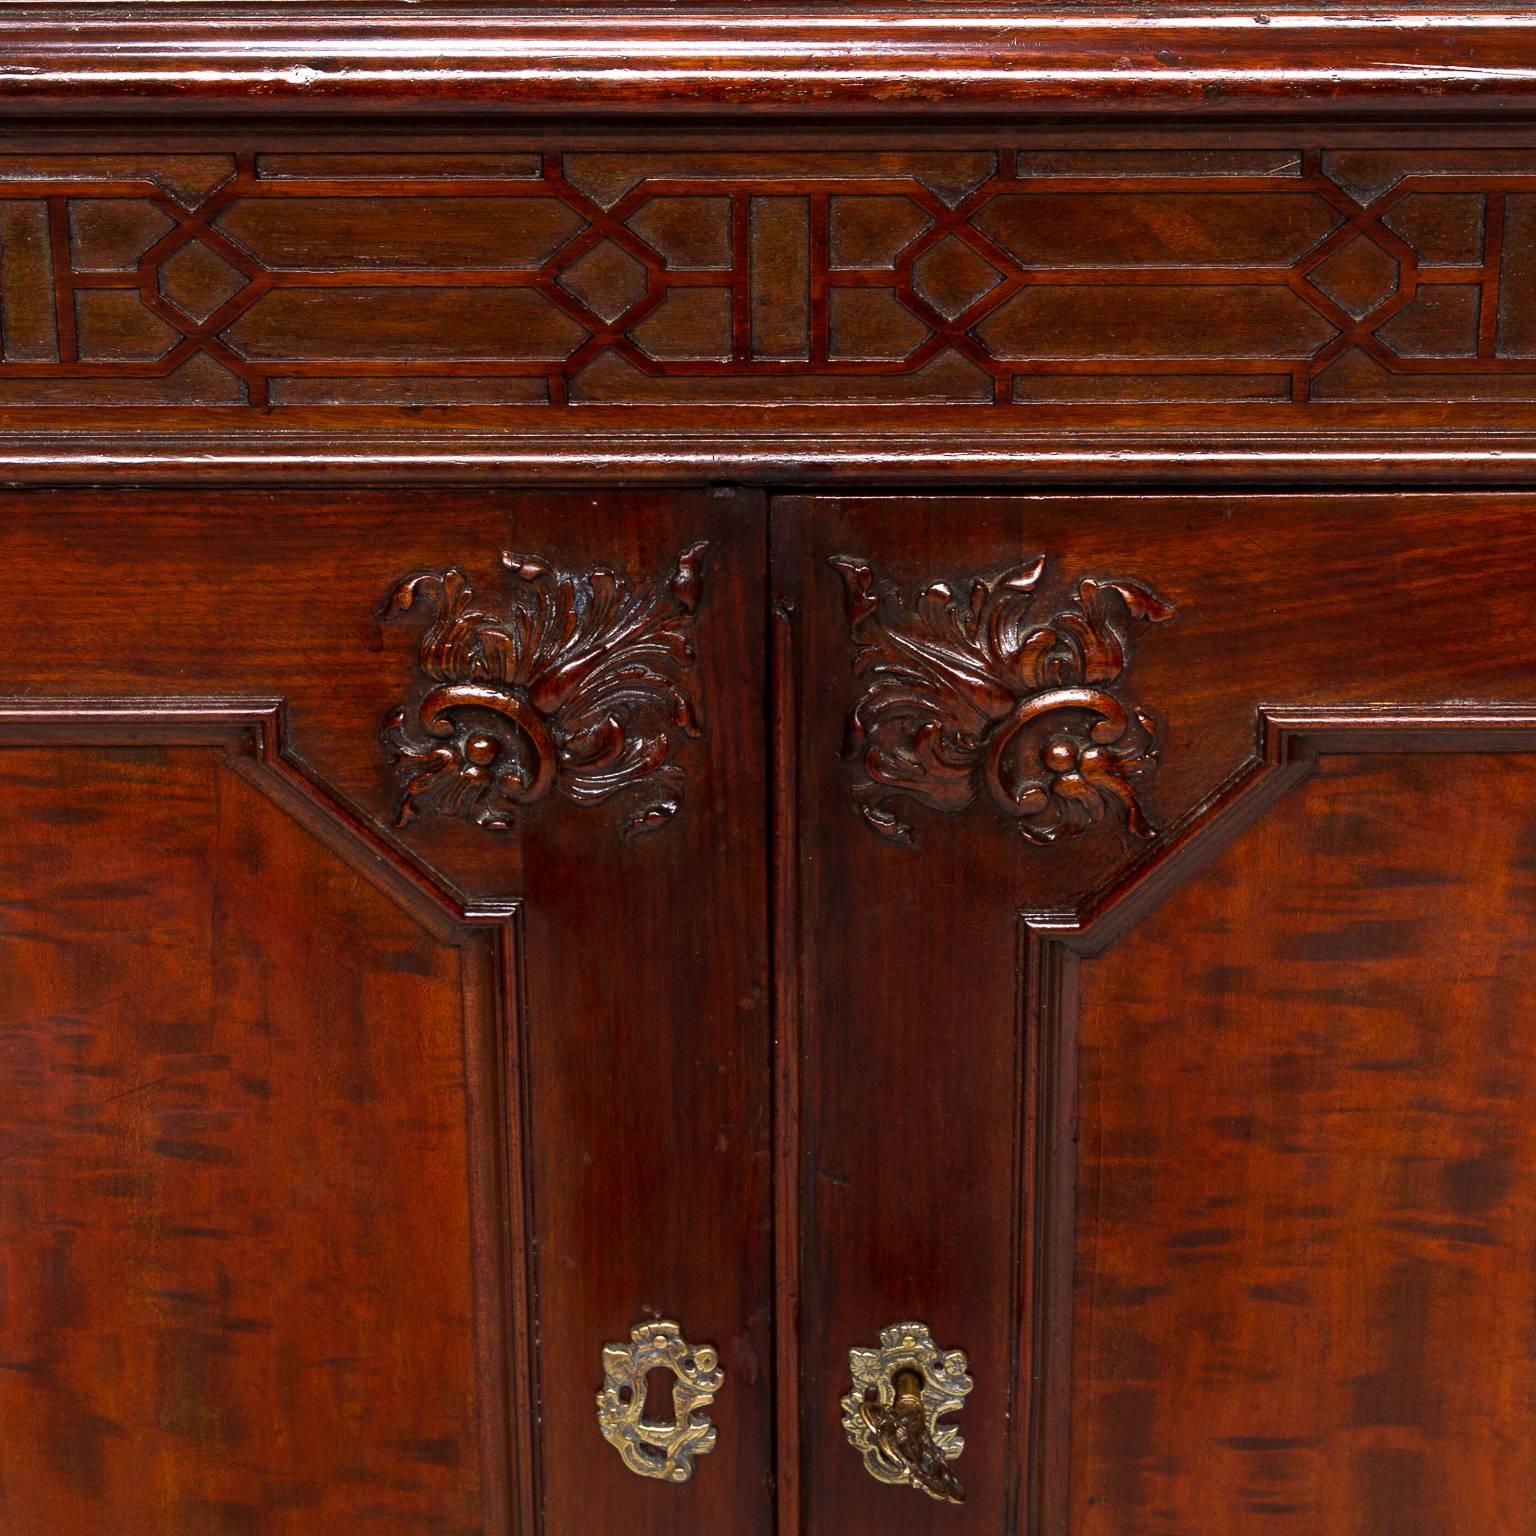 A fine solid mahogany cabinet in the Chippendale style. Wonderful rich color and fine carved details. Excellent craftsmanship to blind fretwork which gives it overall design. Resting on for tapered legs. Ribbon and flame cuts of wood. Two doors open